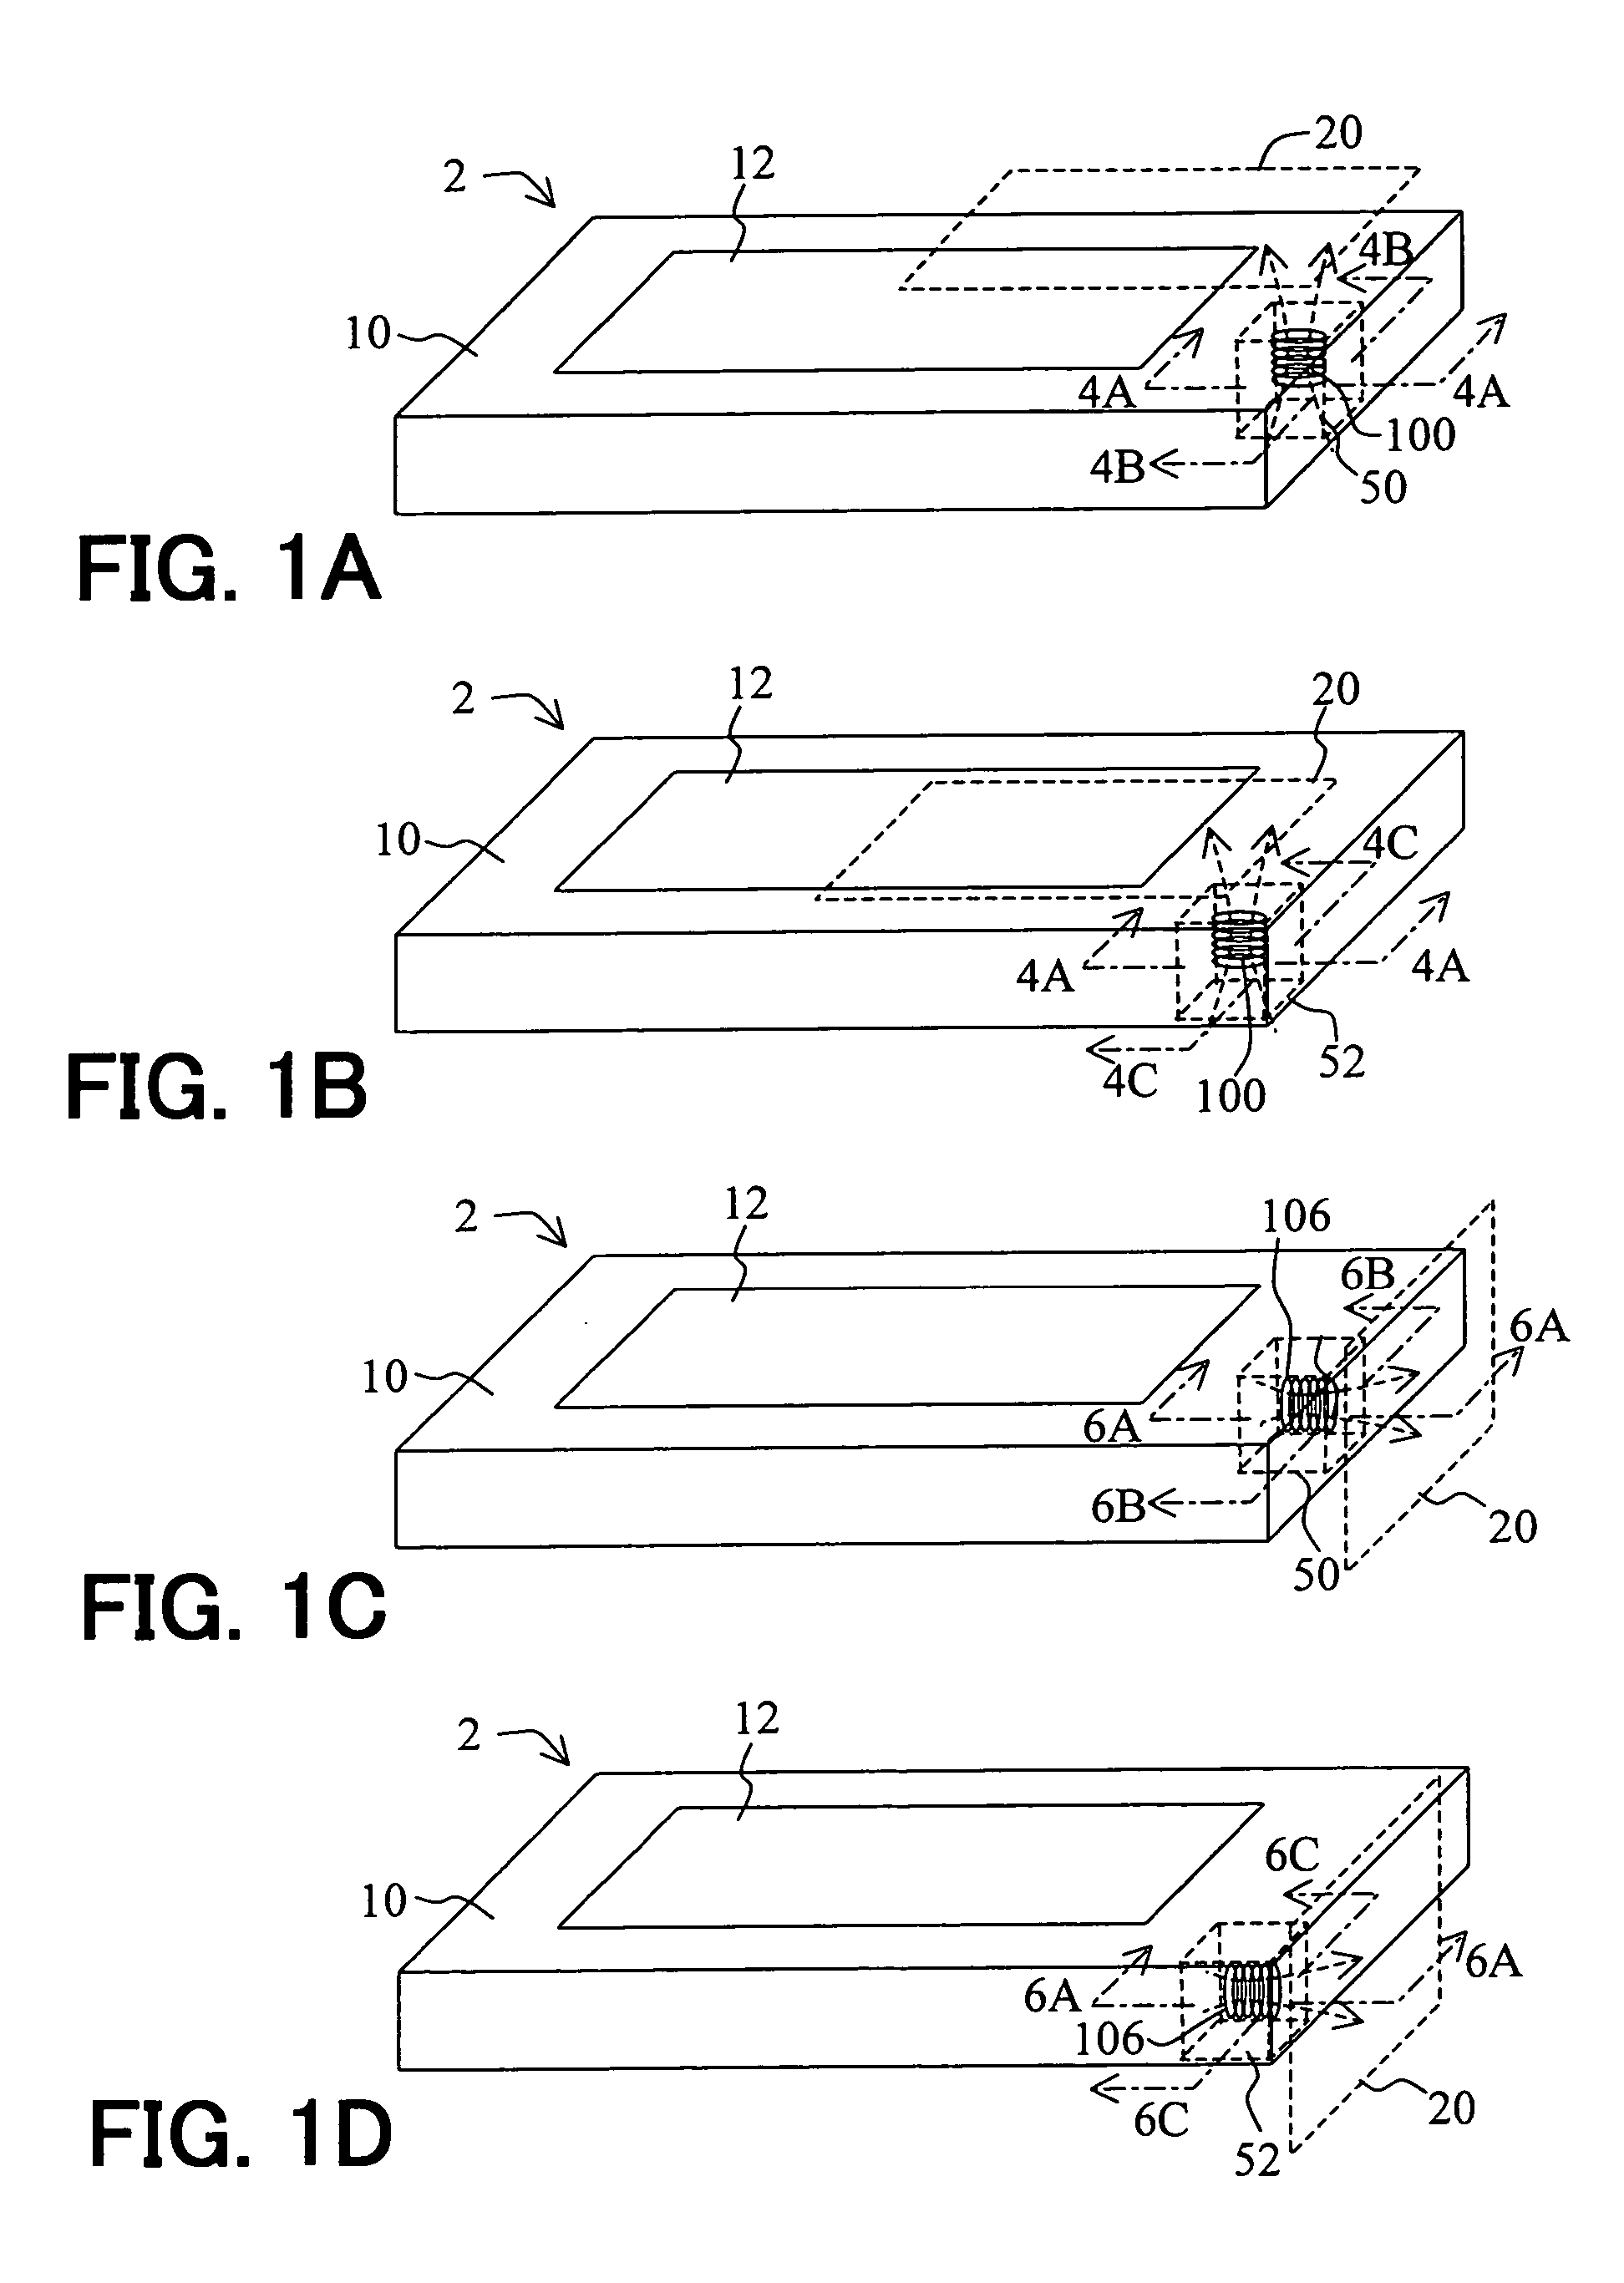 Information processing apparatus with contactless reader/writer, and coil antenna for magnetic coupling